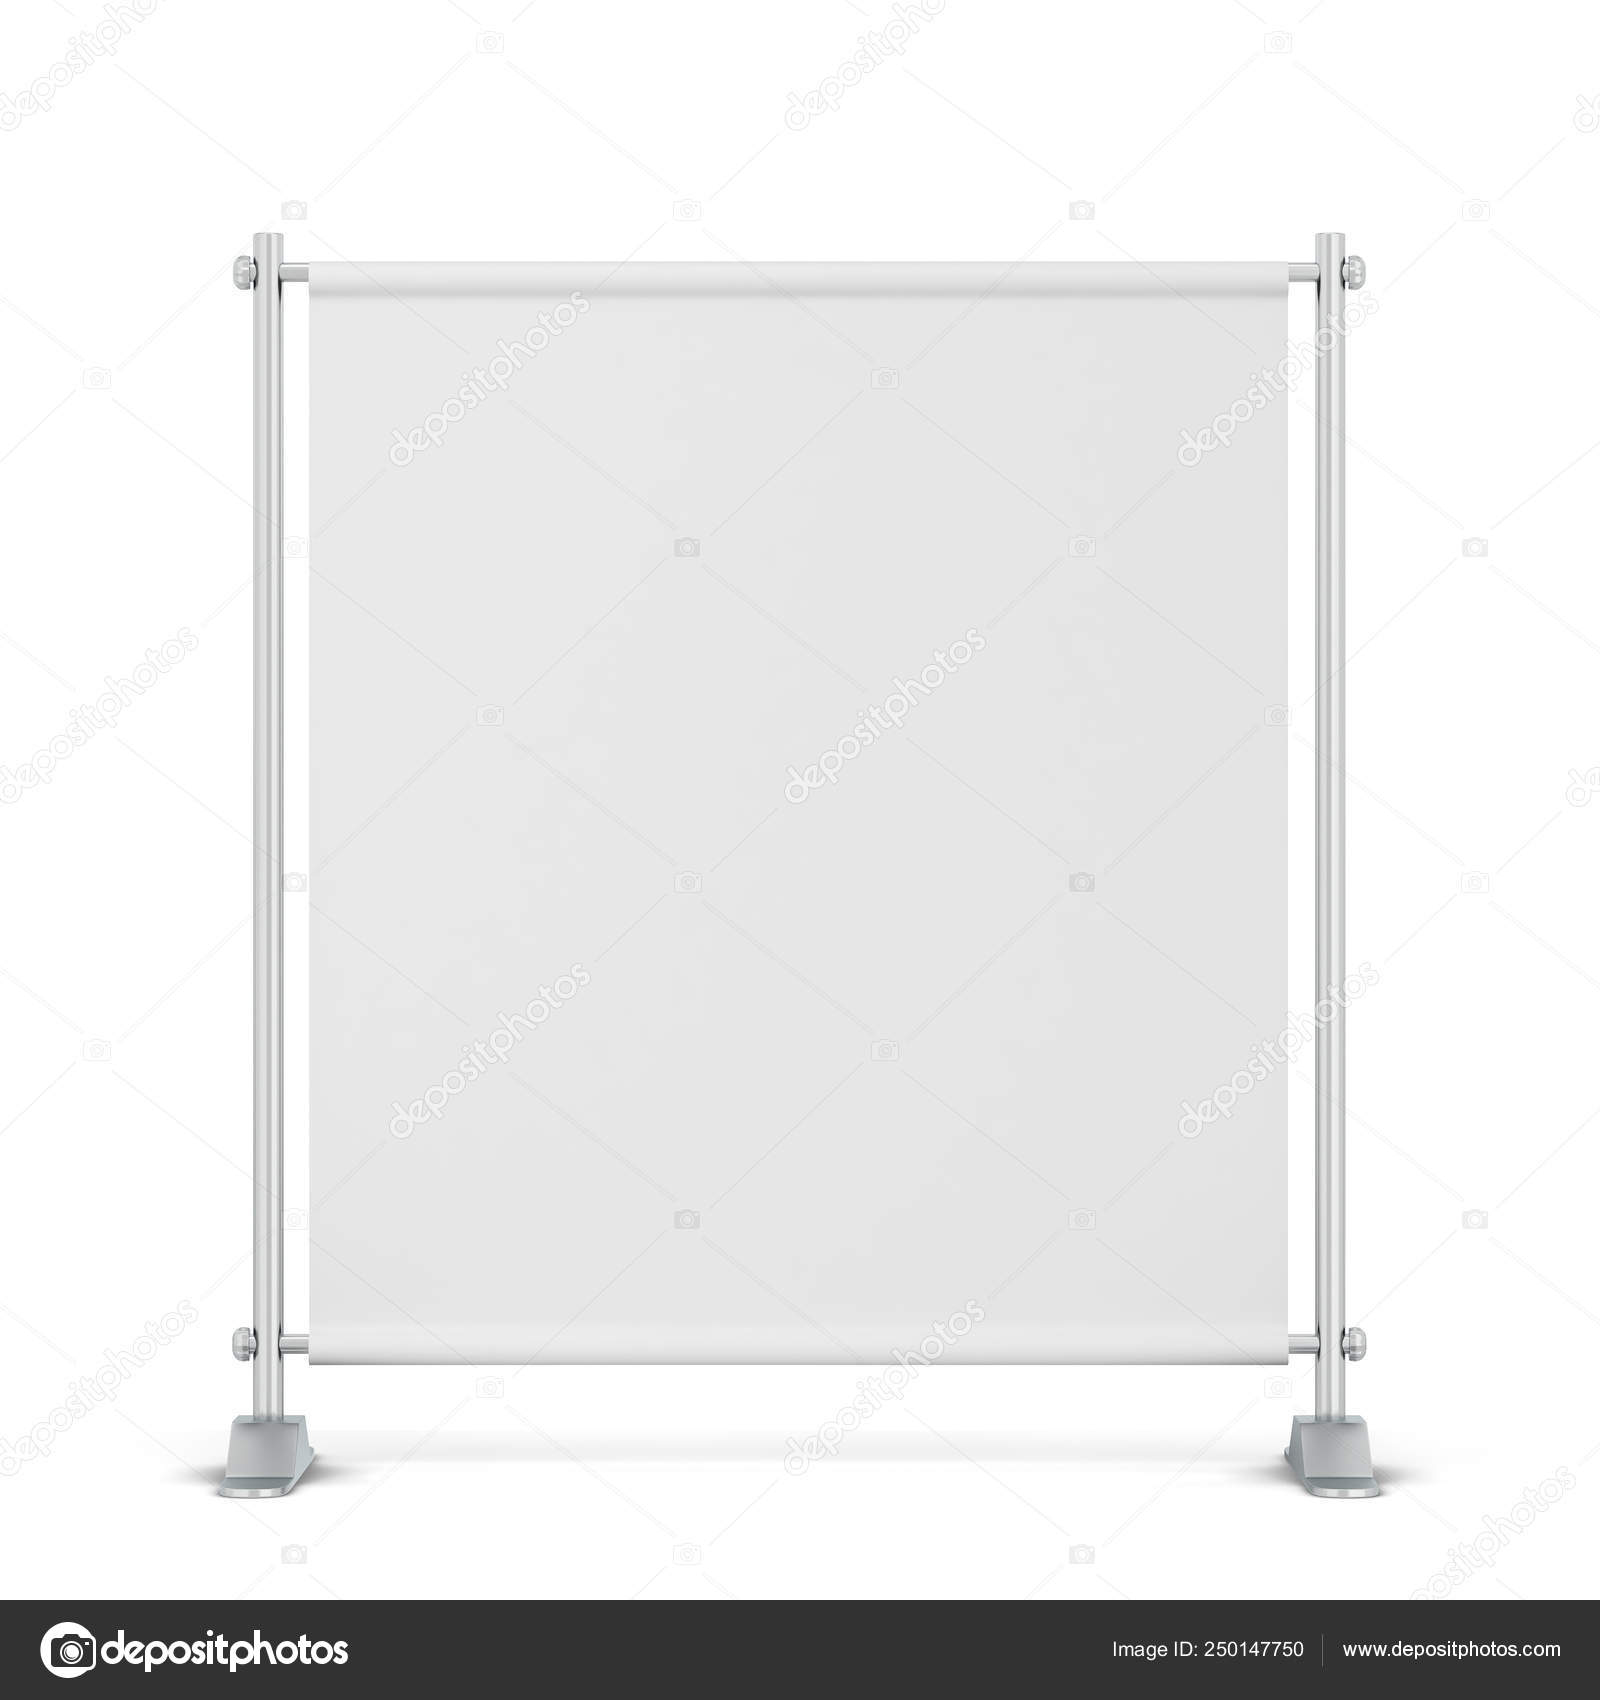 Download Blank Backdrop Banner Mockup Stock Photo Image By C Montego 250147750